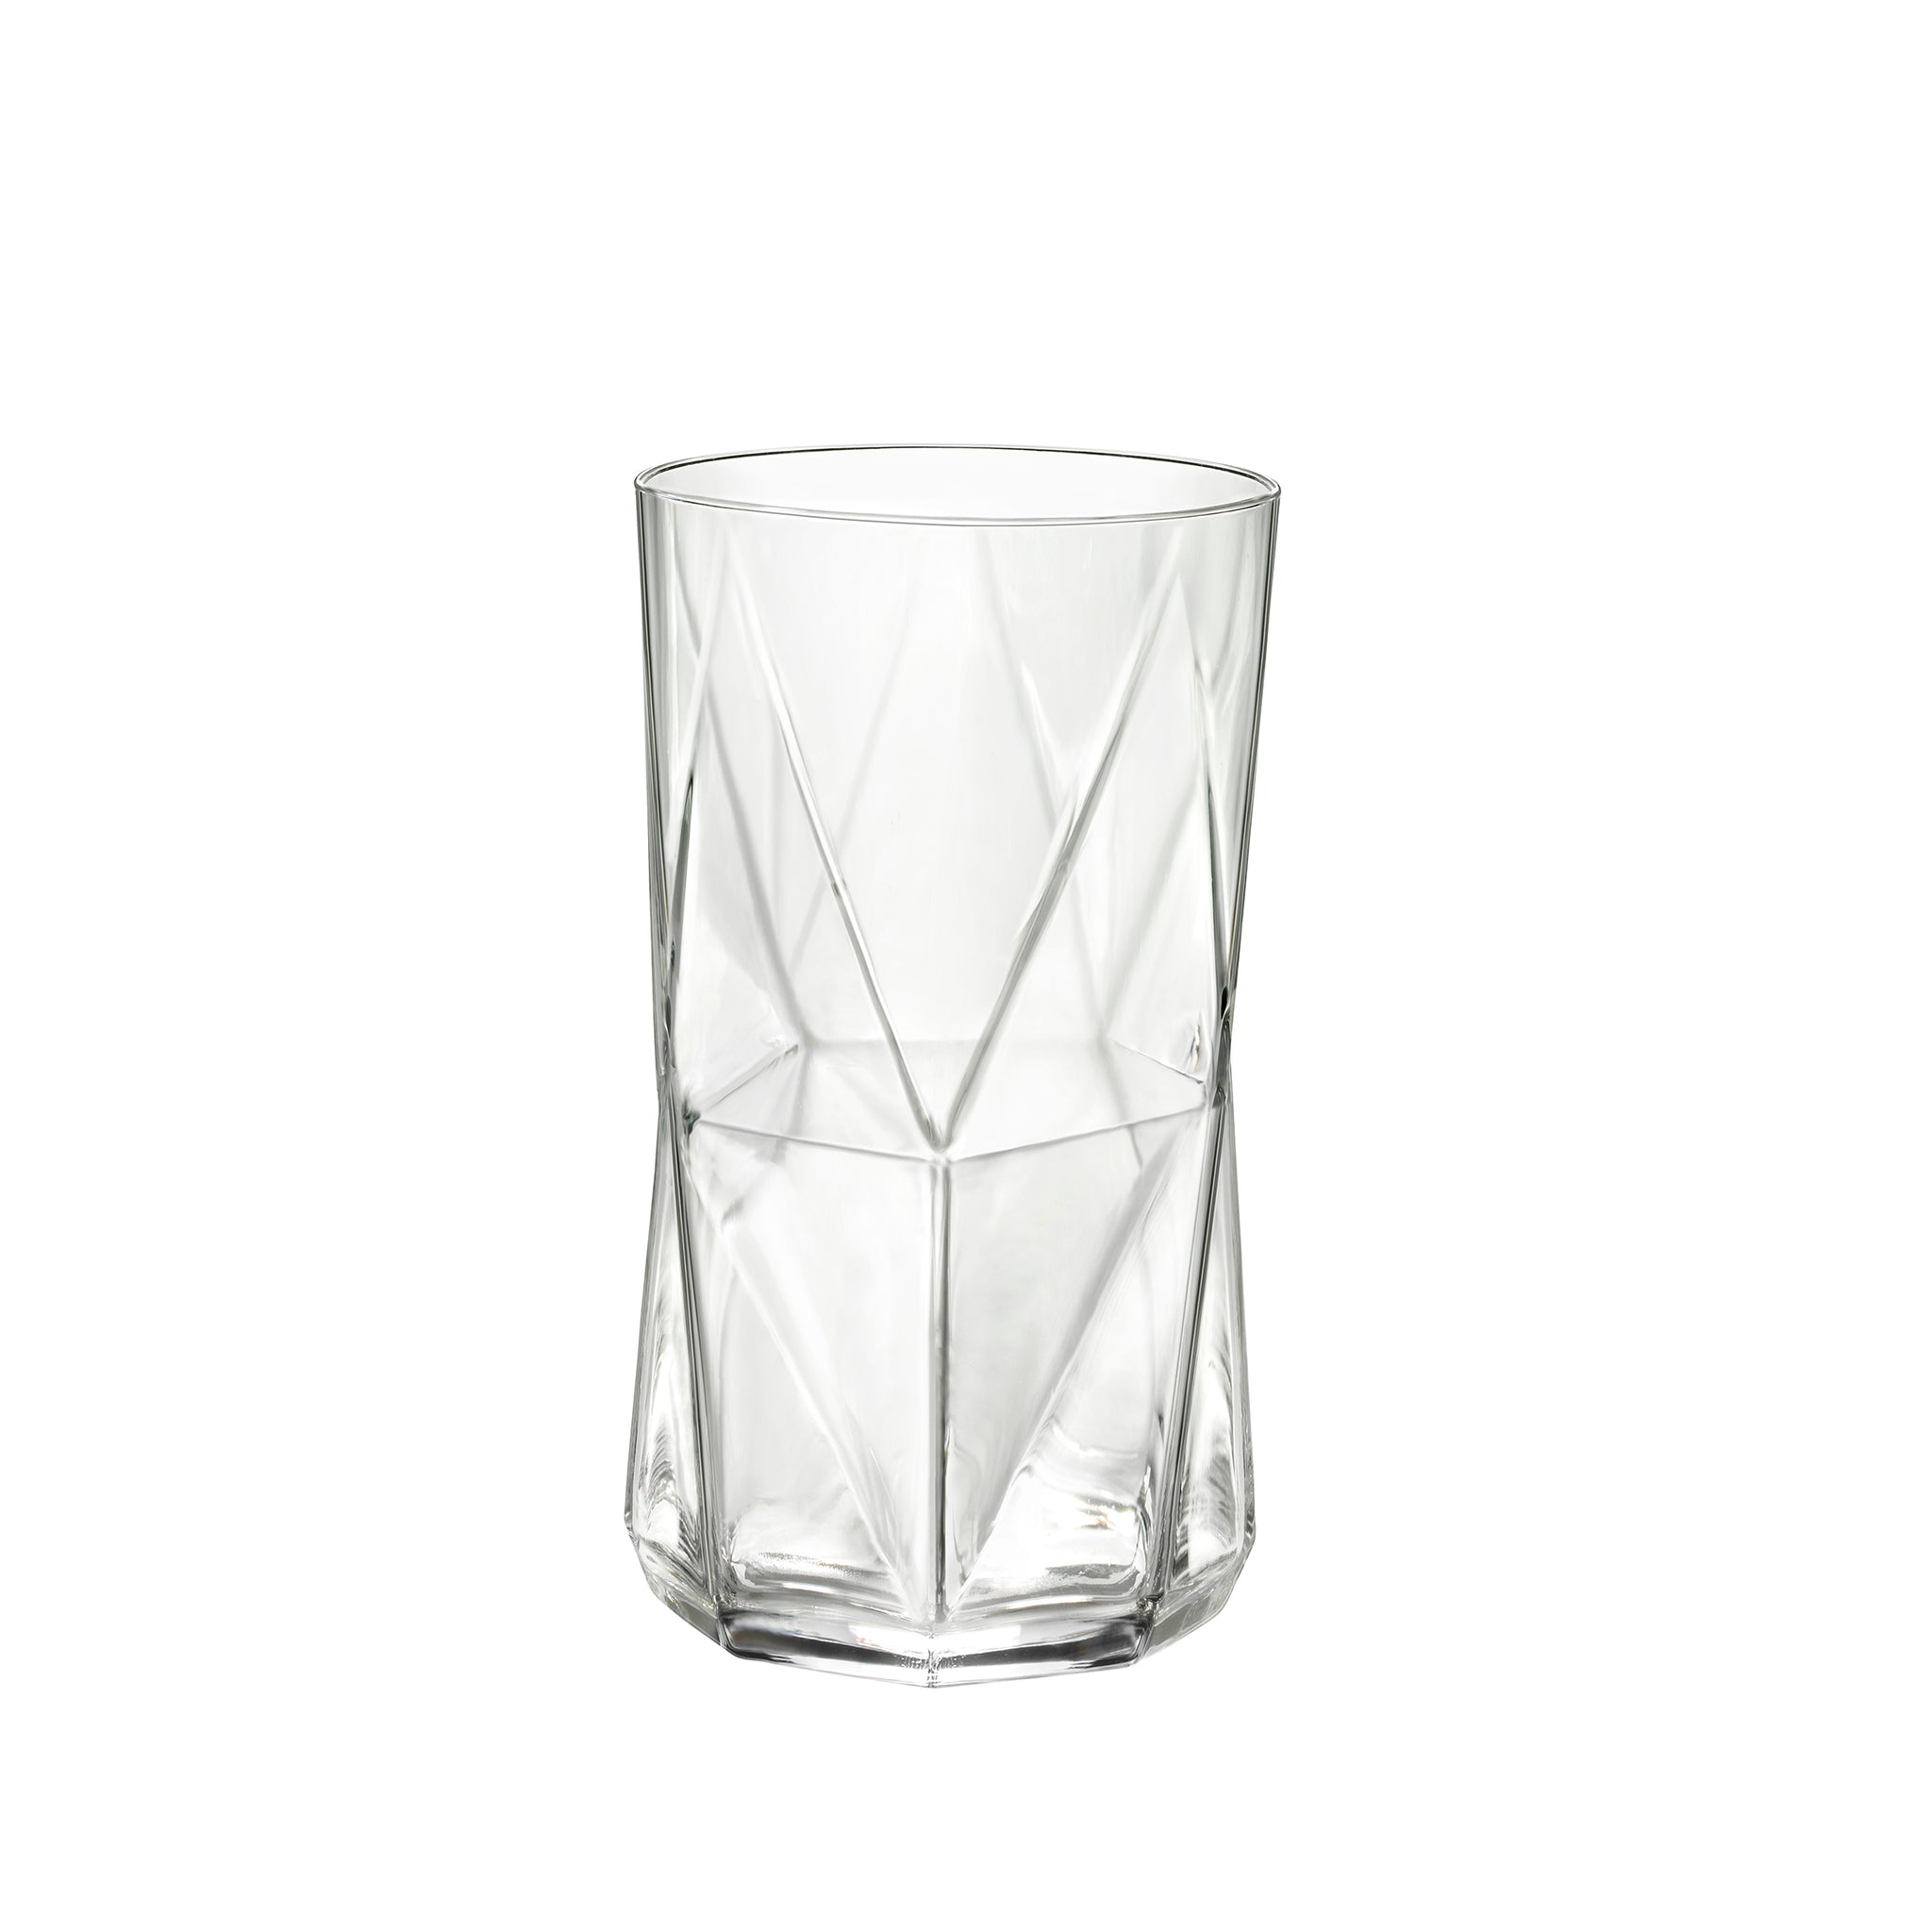 Cassiopea 15.75 oz. Cooler Drinking Glasses (Set of 4)